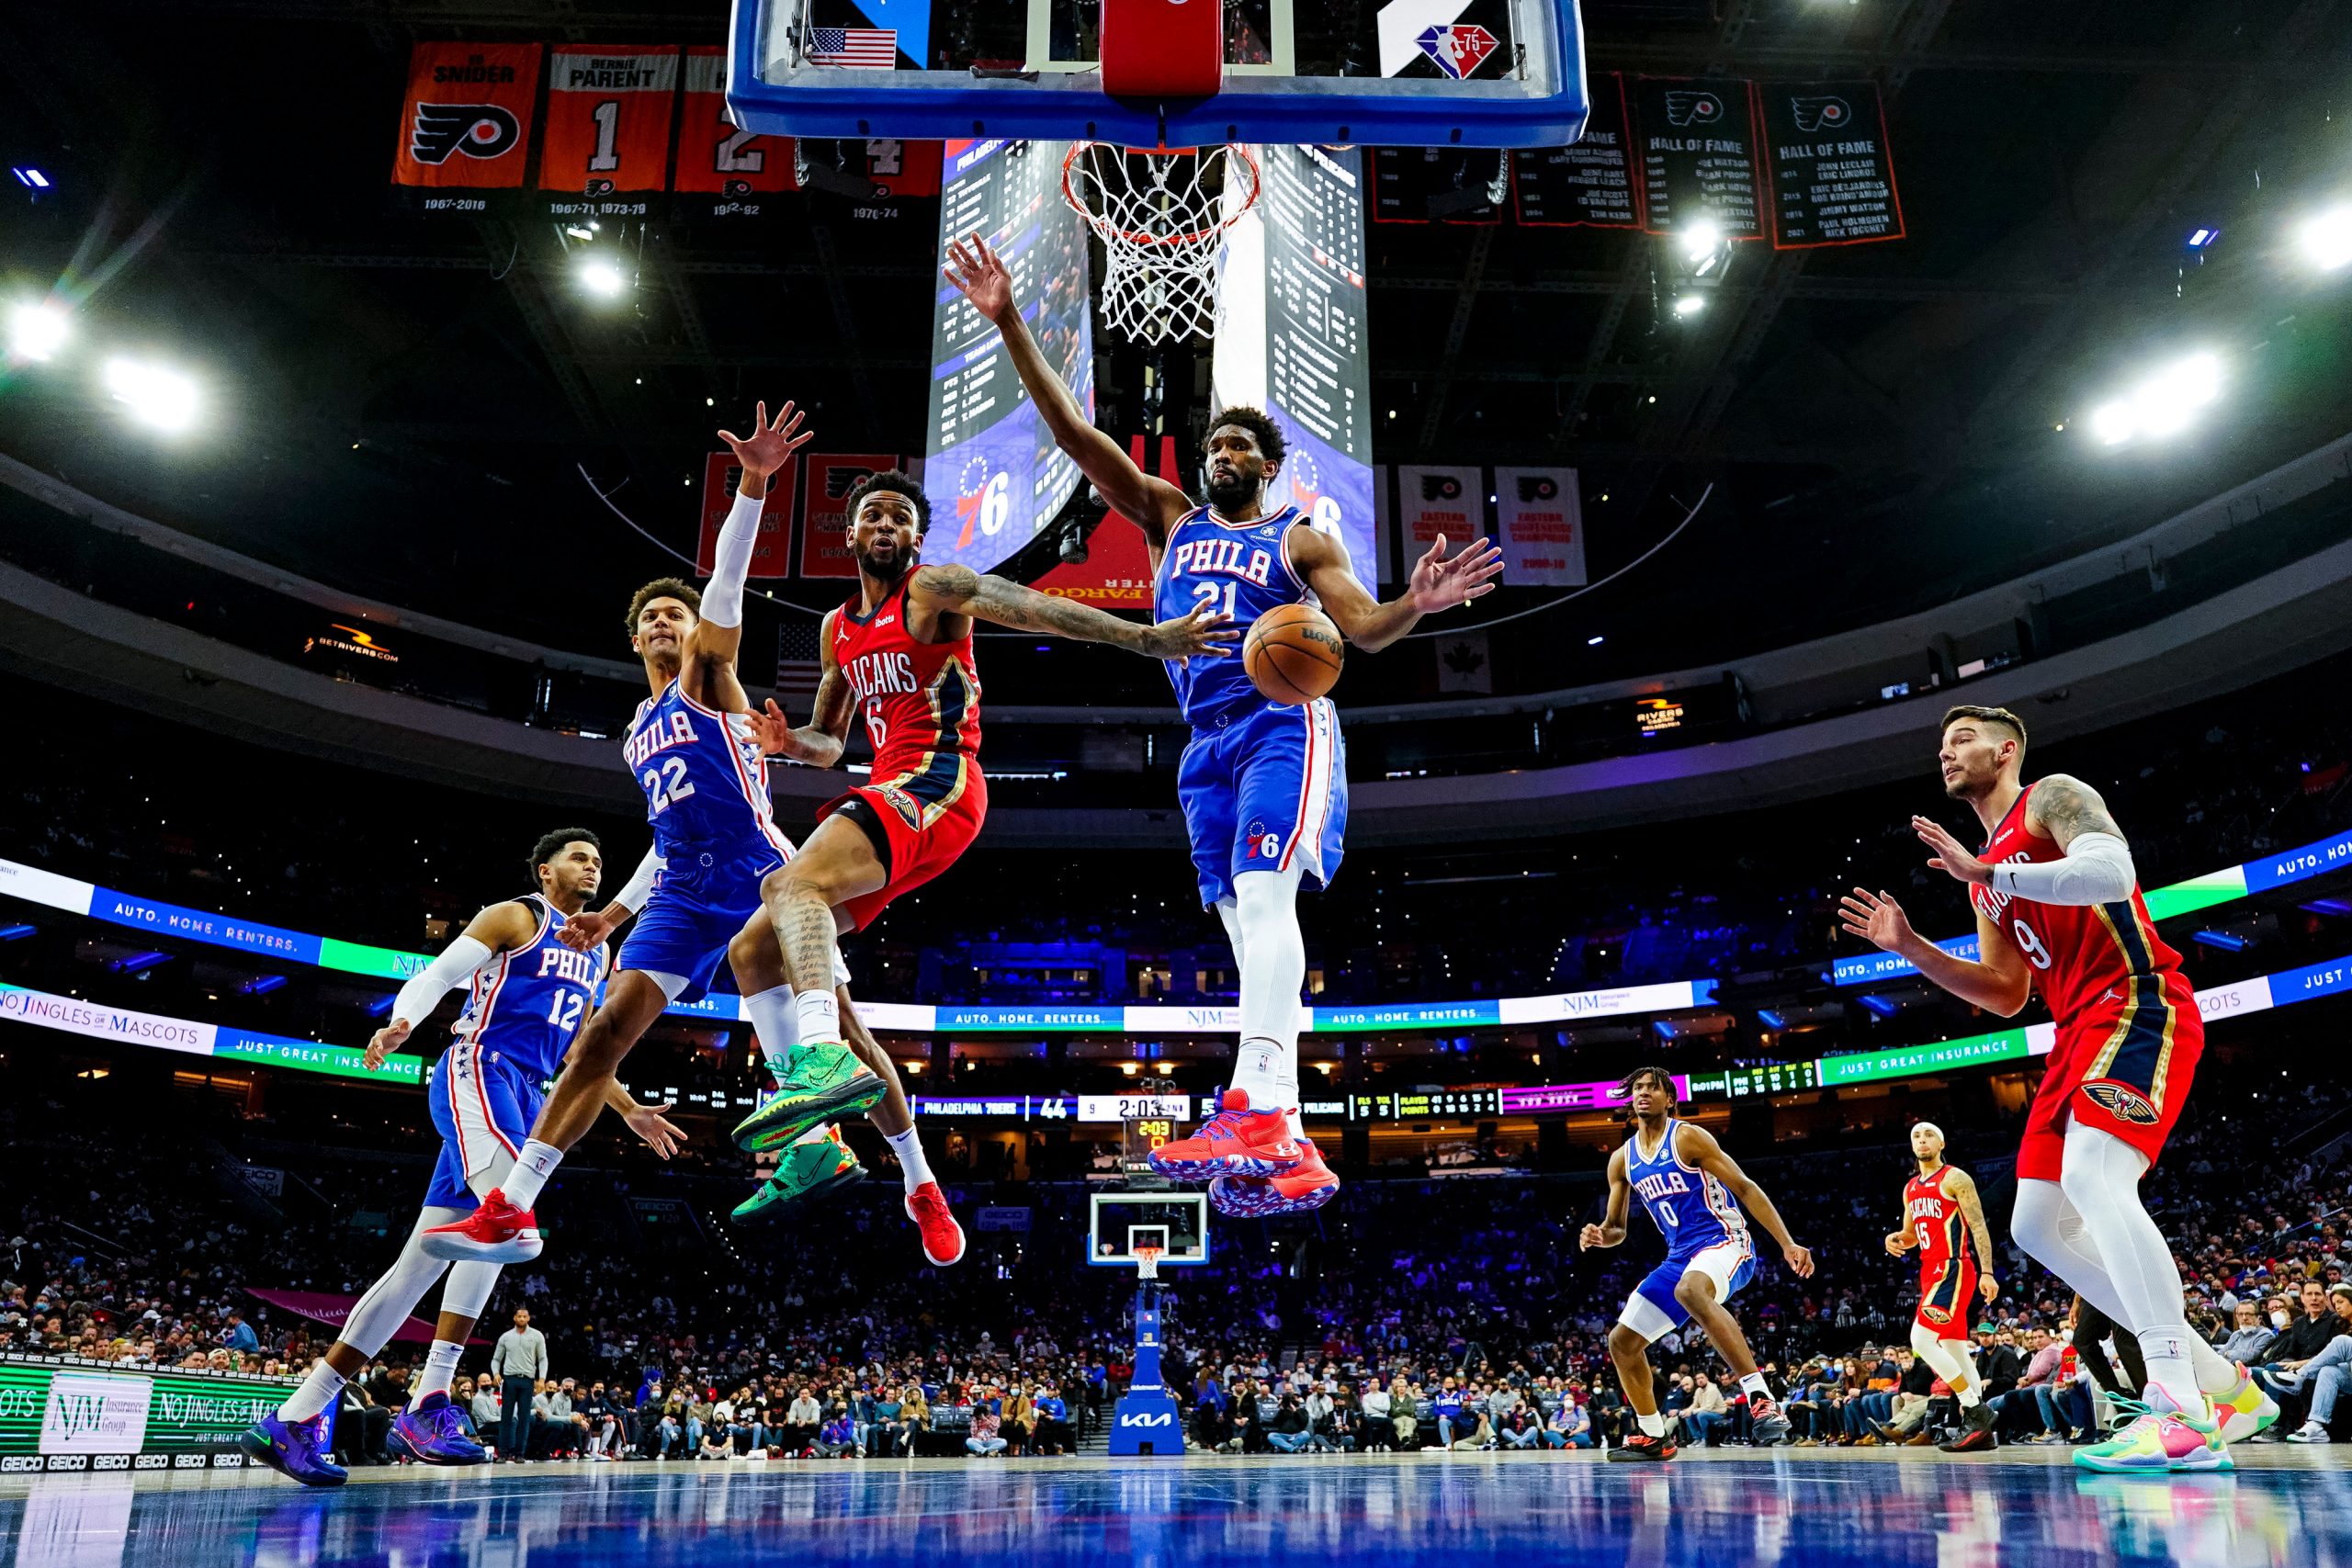 NBA: Embiid leads 76ers past short-handed Pelicans, 117-107